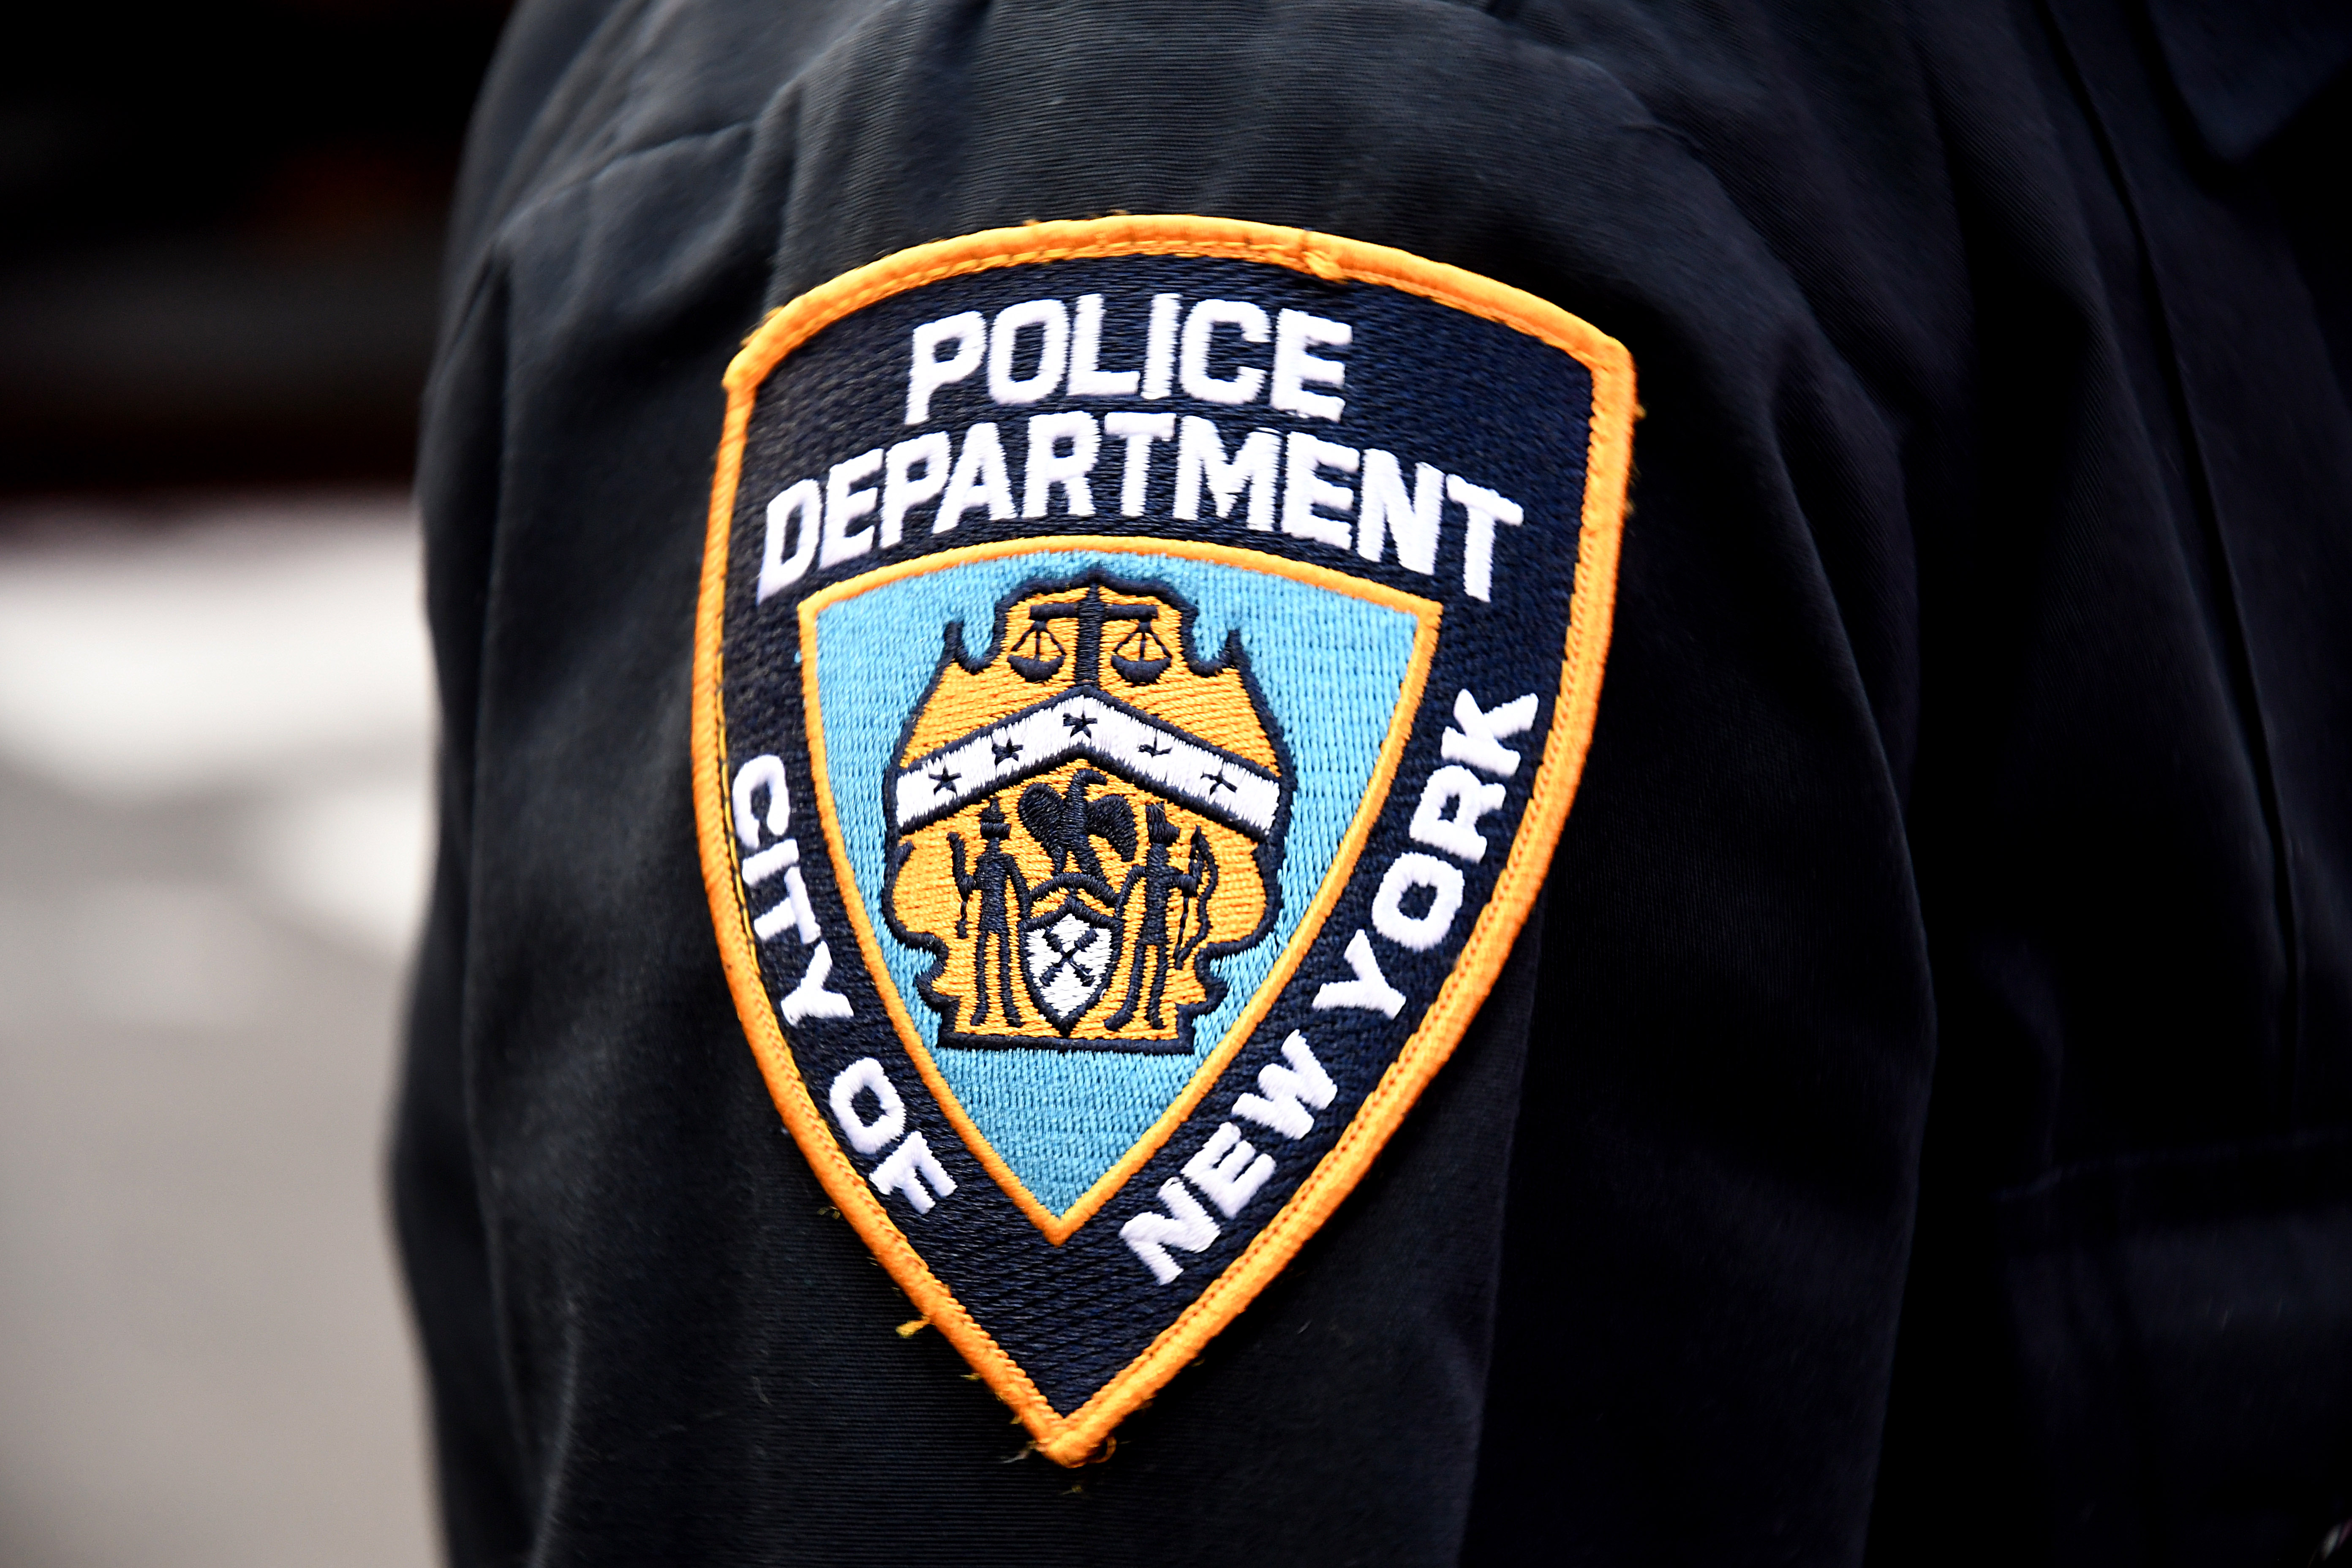 NYPD police badge.